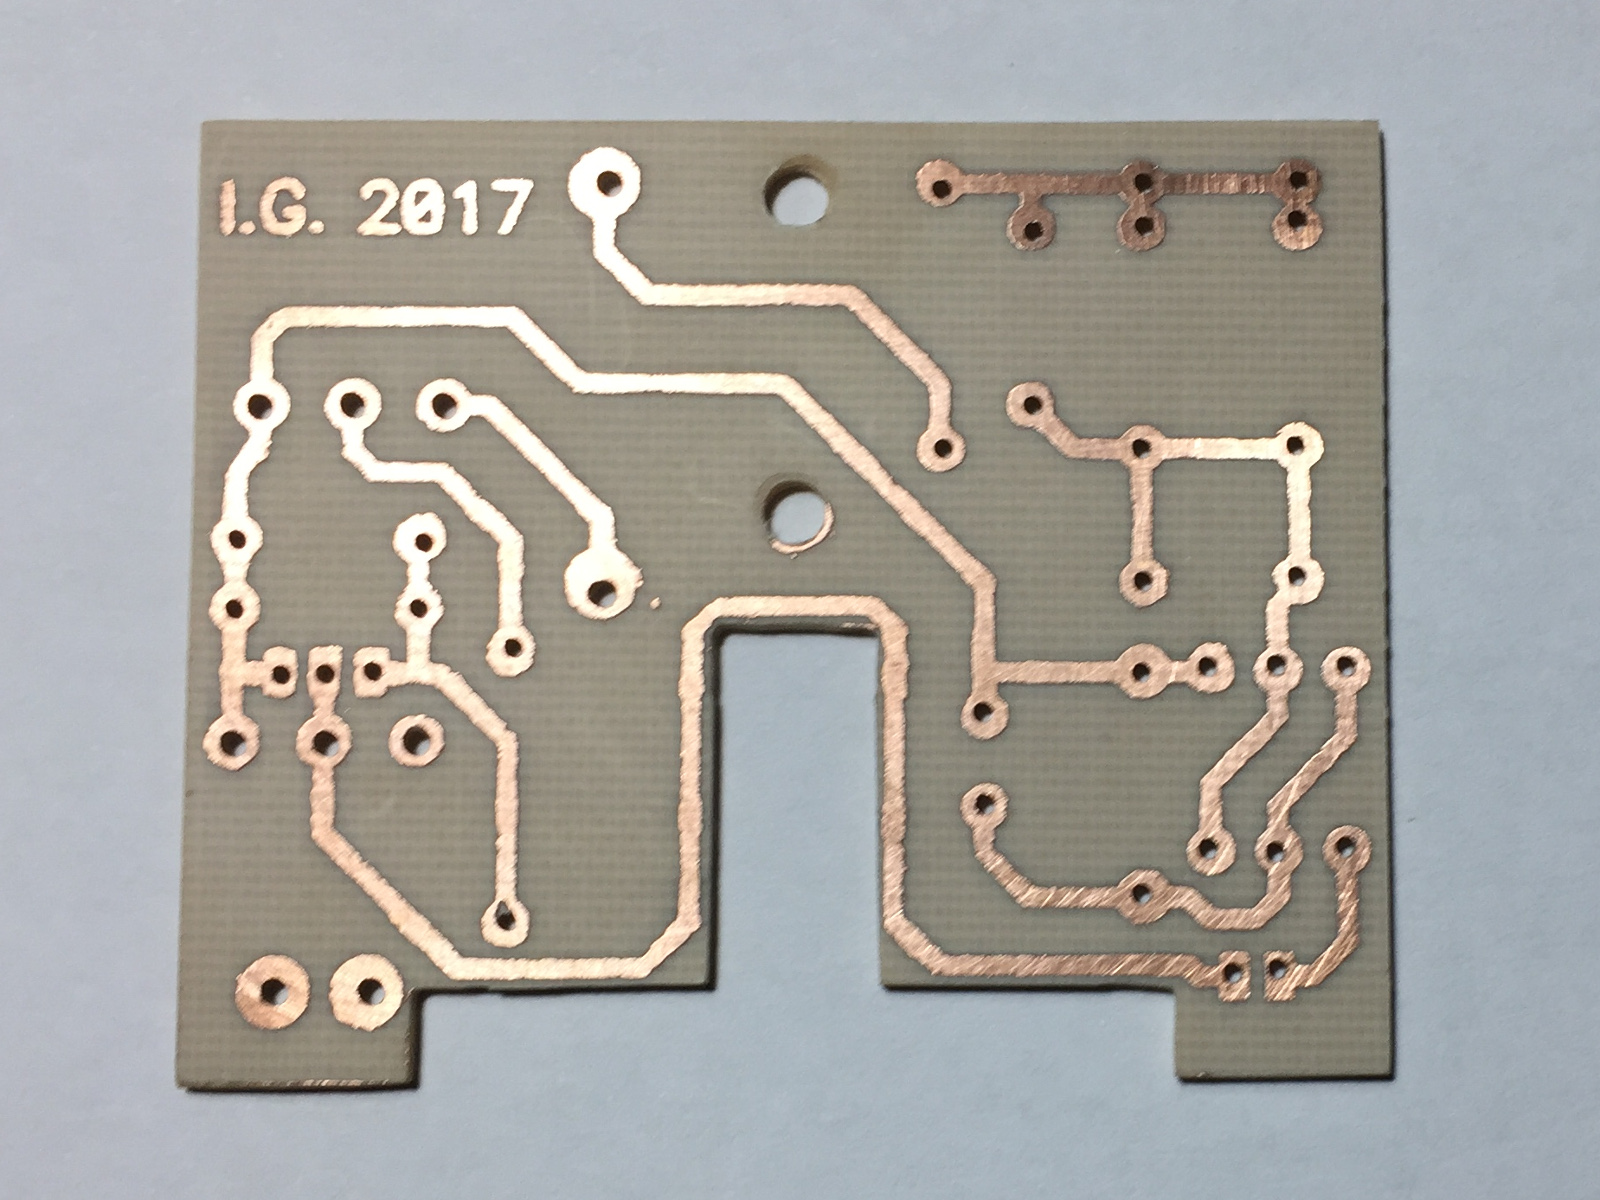 Etching printed circuits boards at home